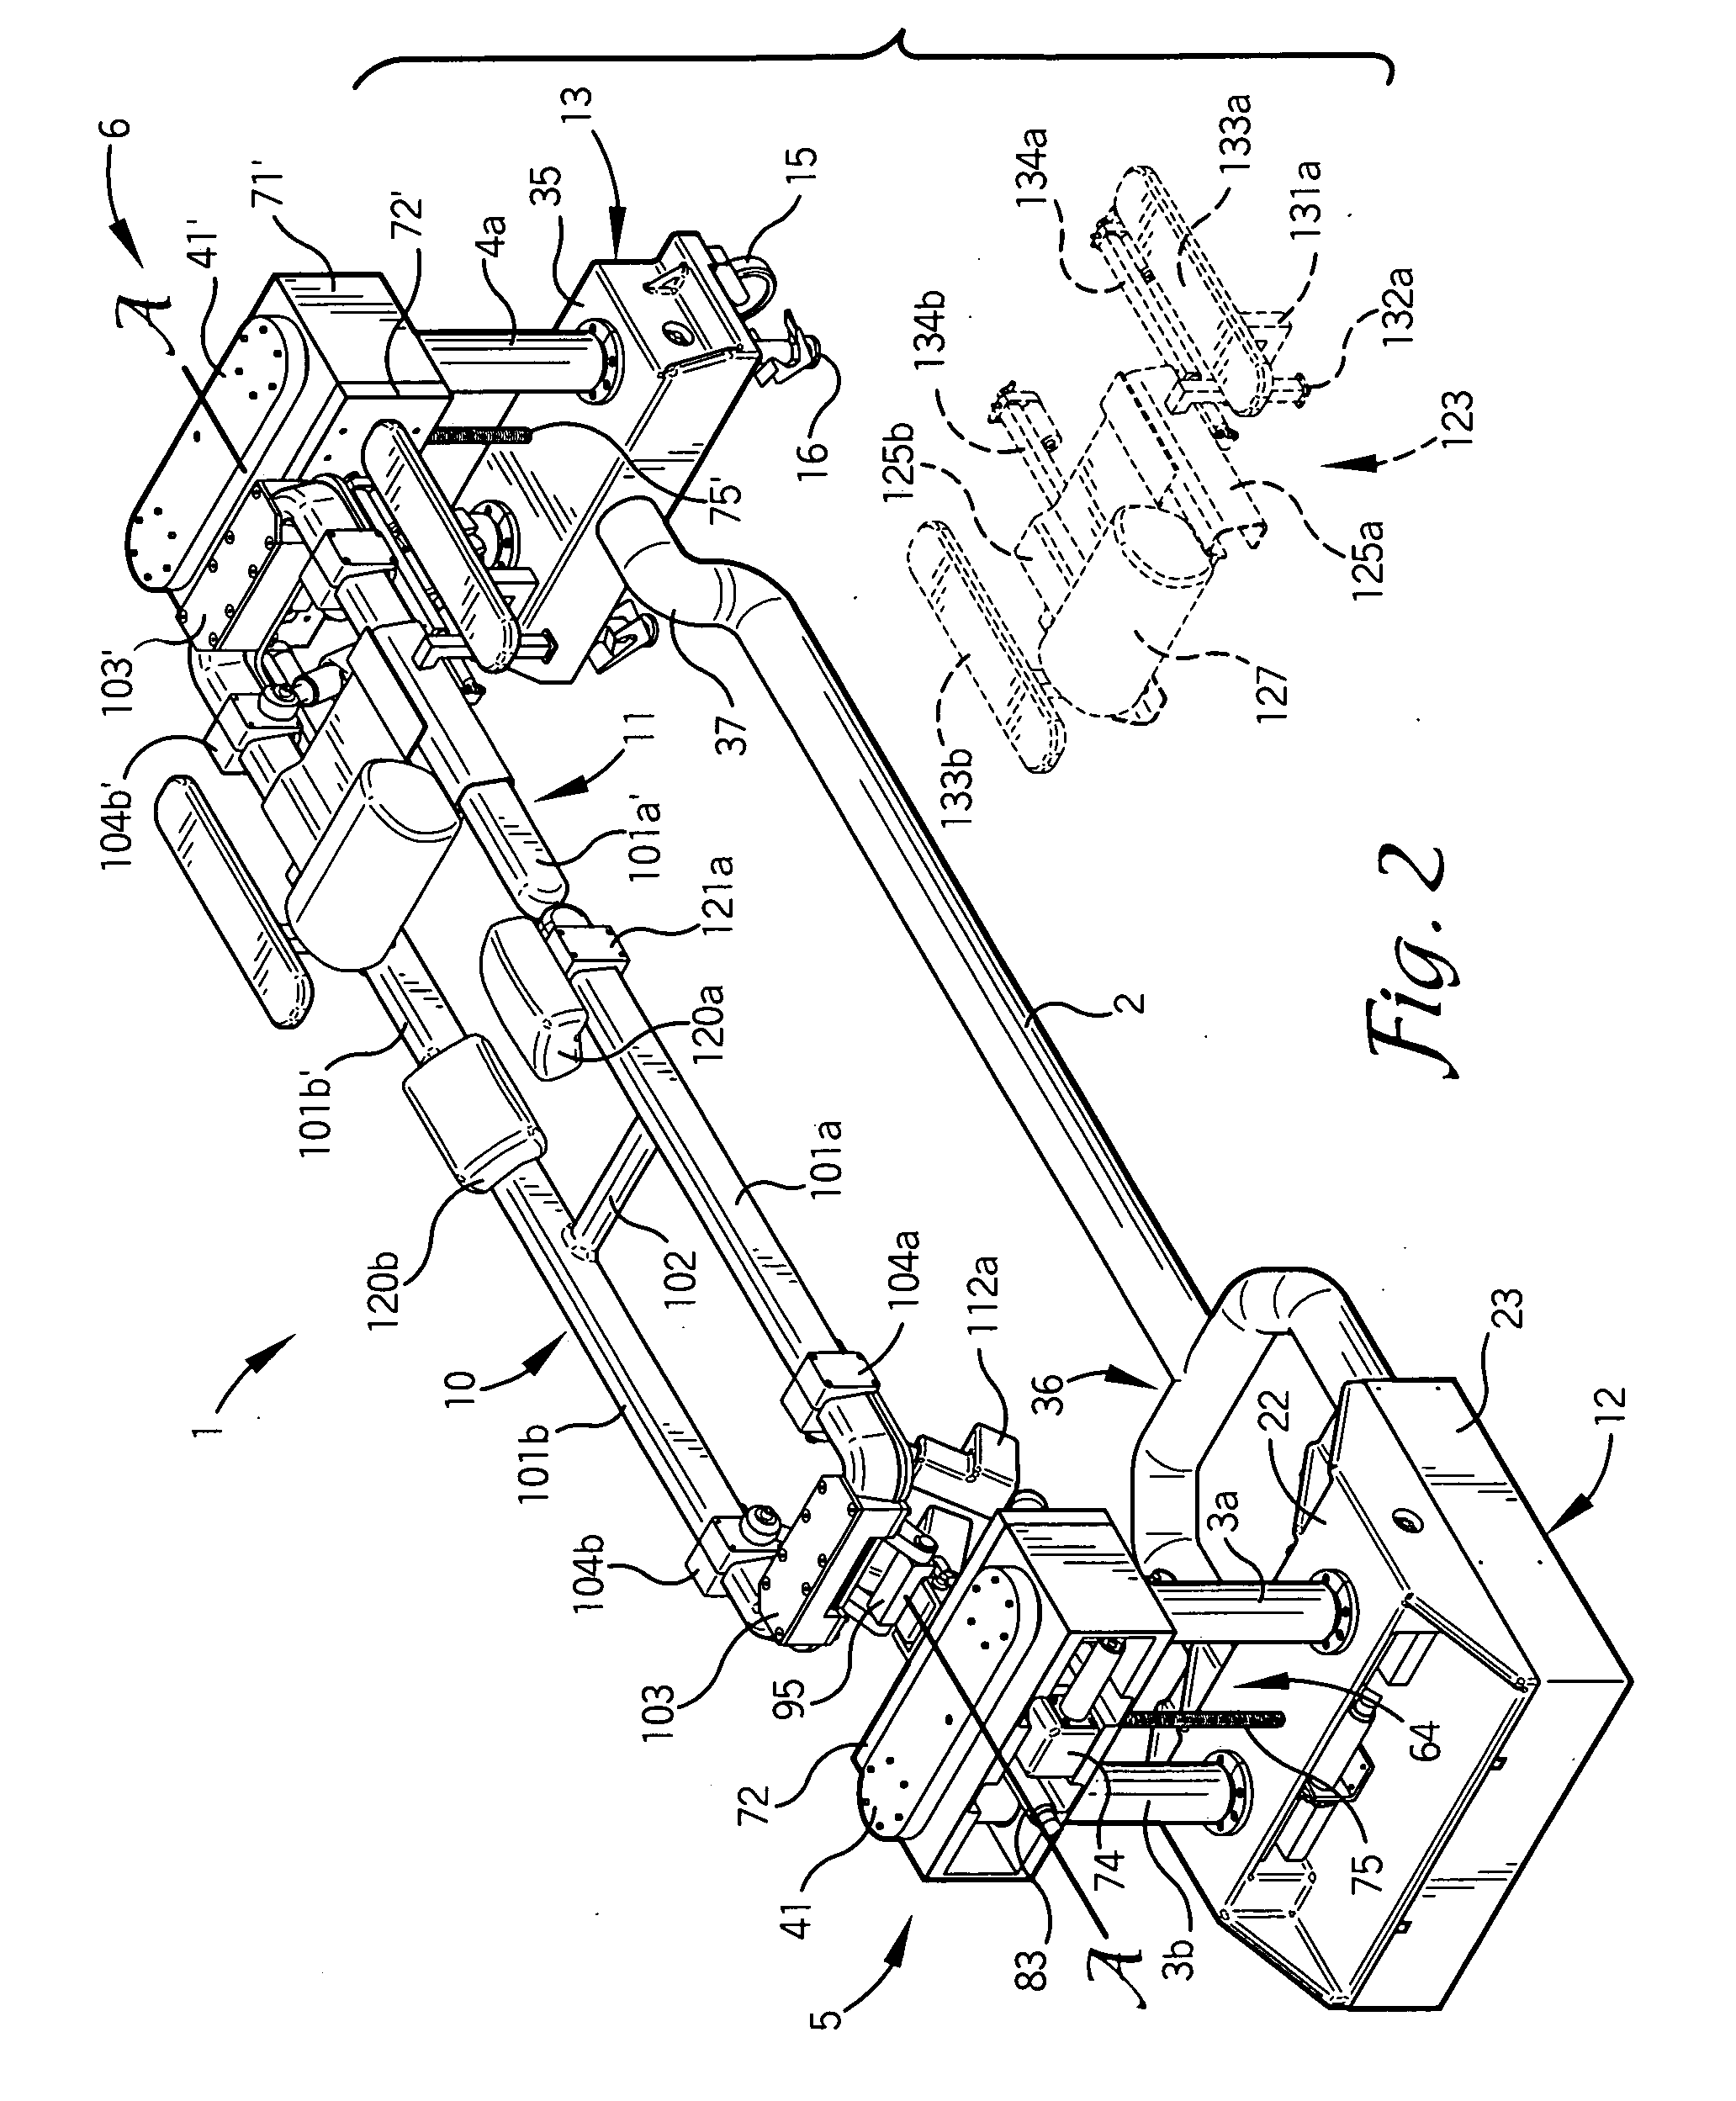 Patient positioning support structure with trunk translator